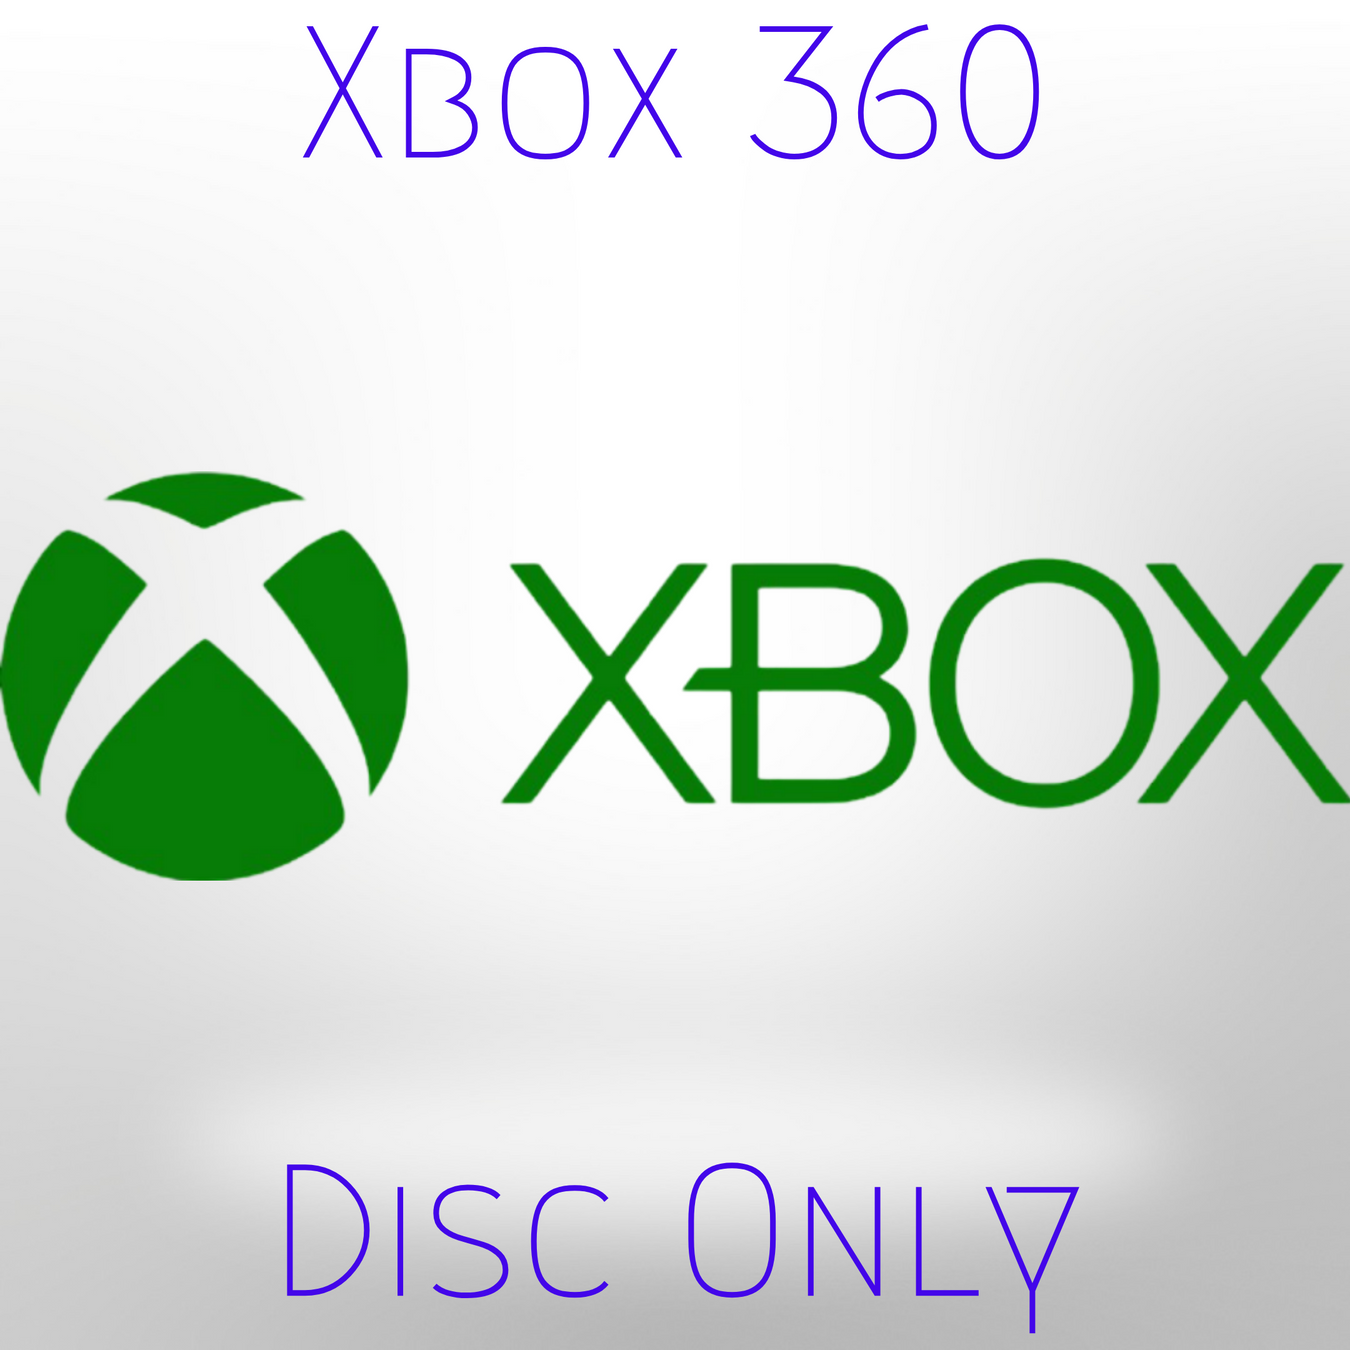 Disc Only Logo